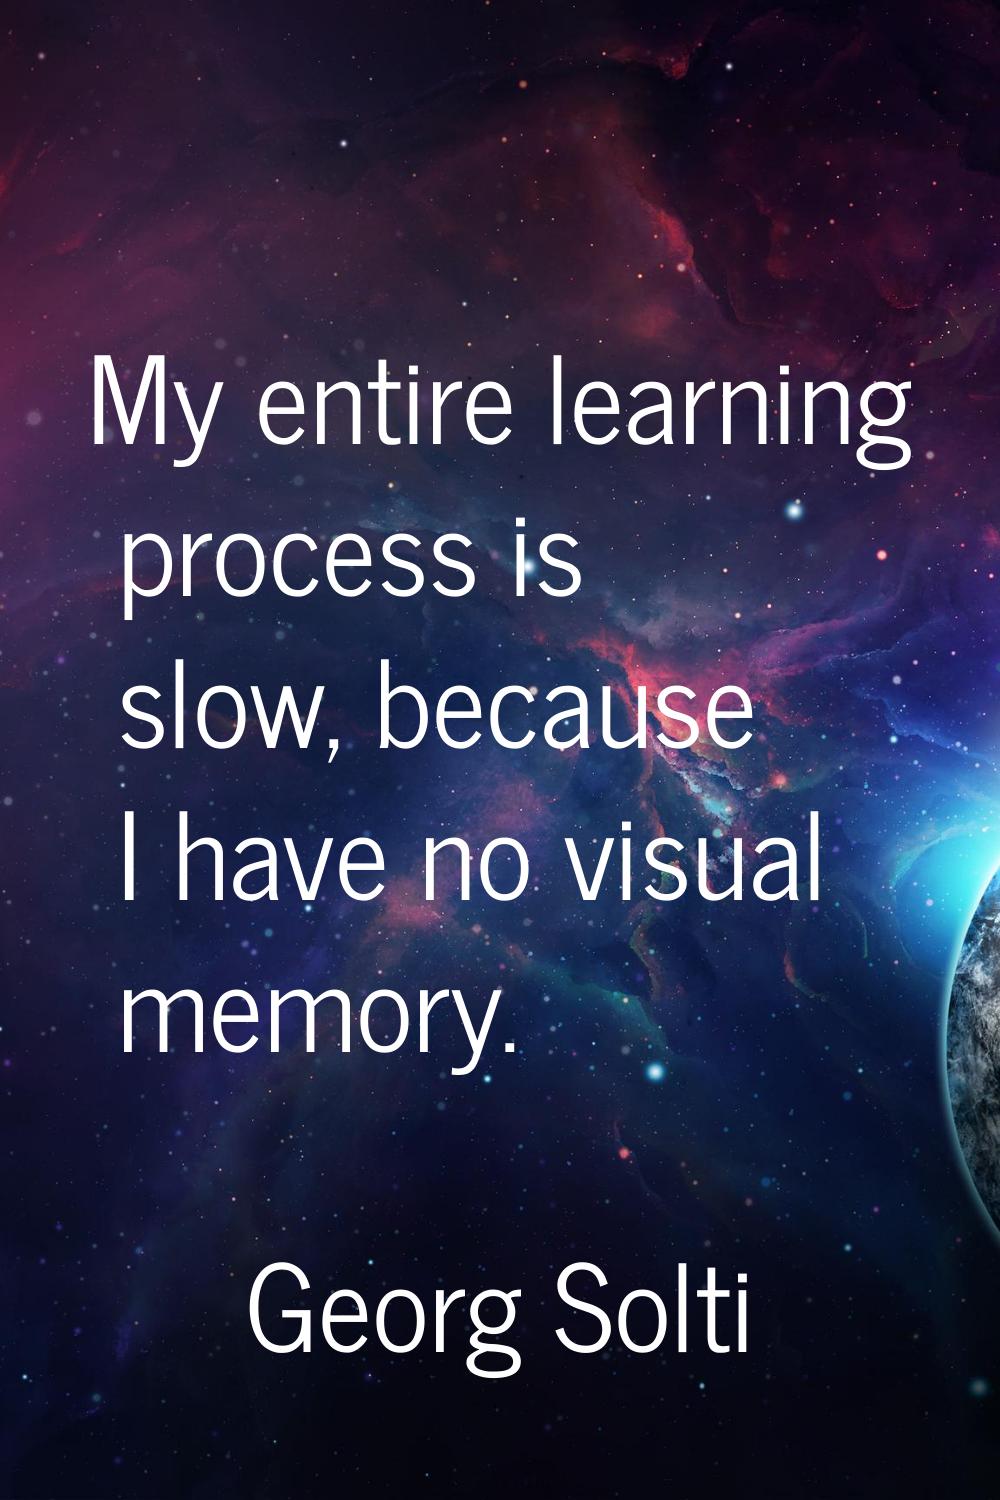 My entire learning process is slow, because I have no visual memory.